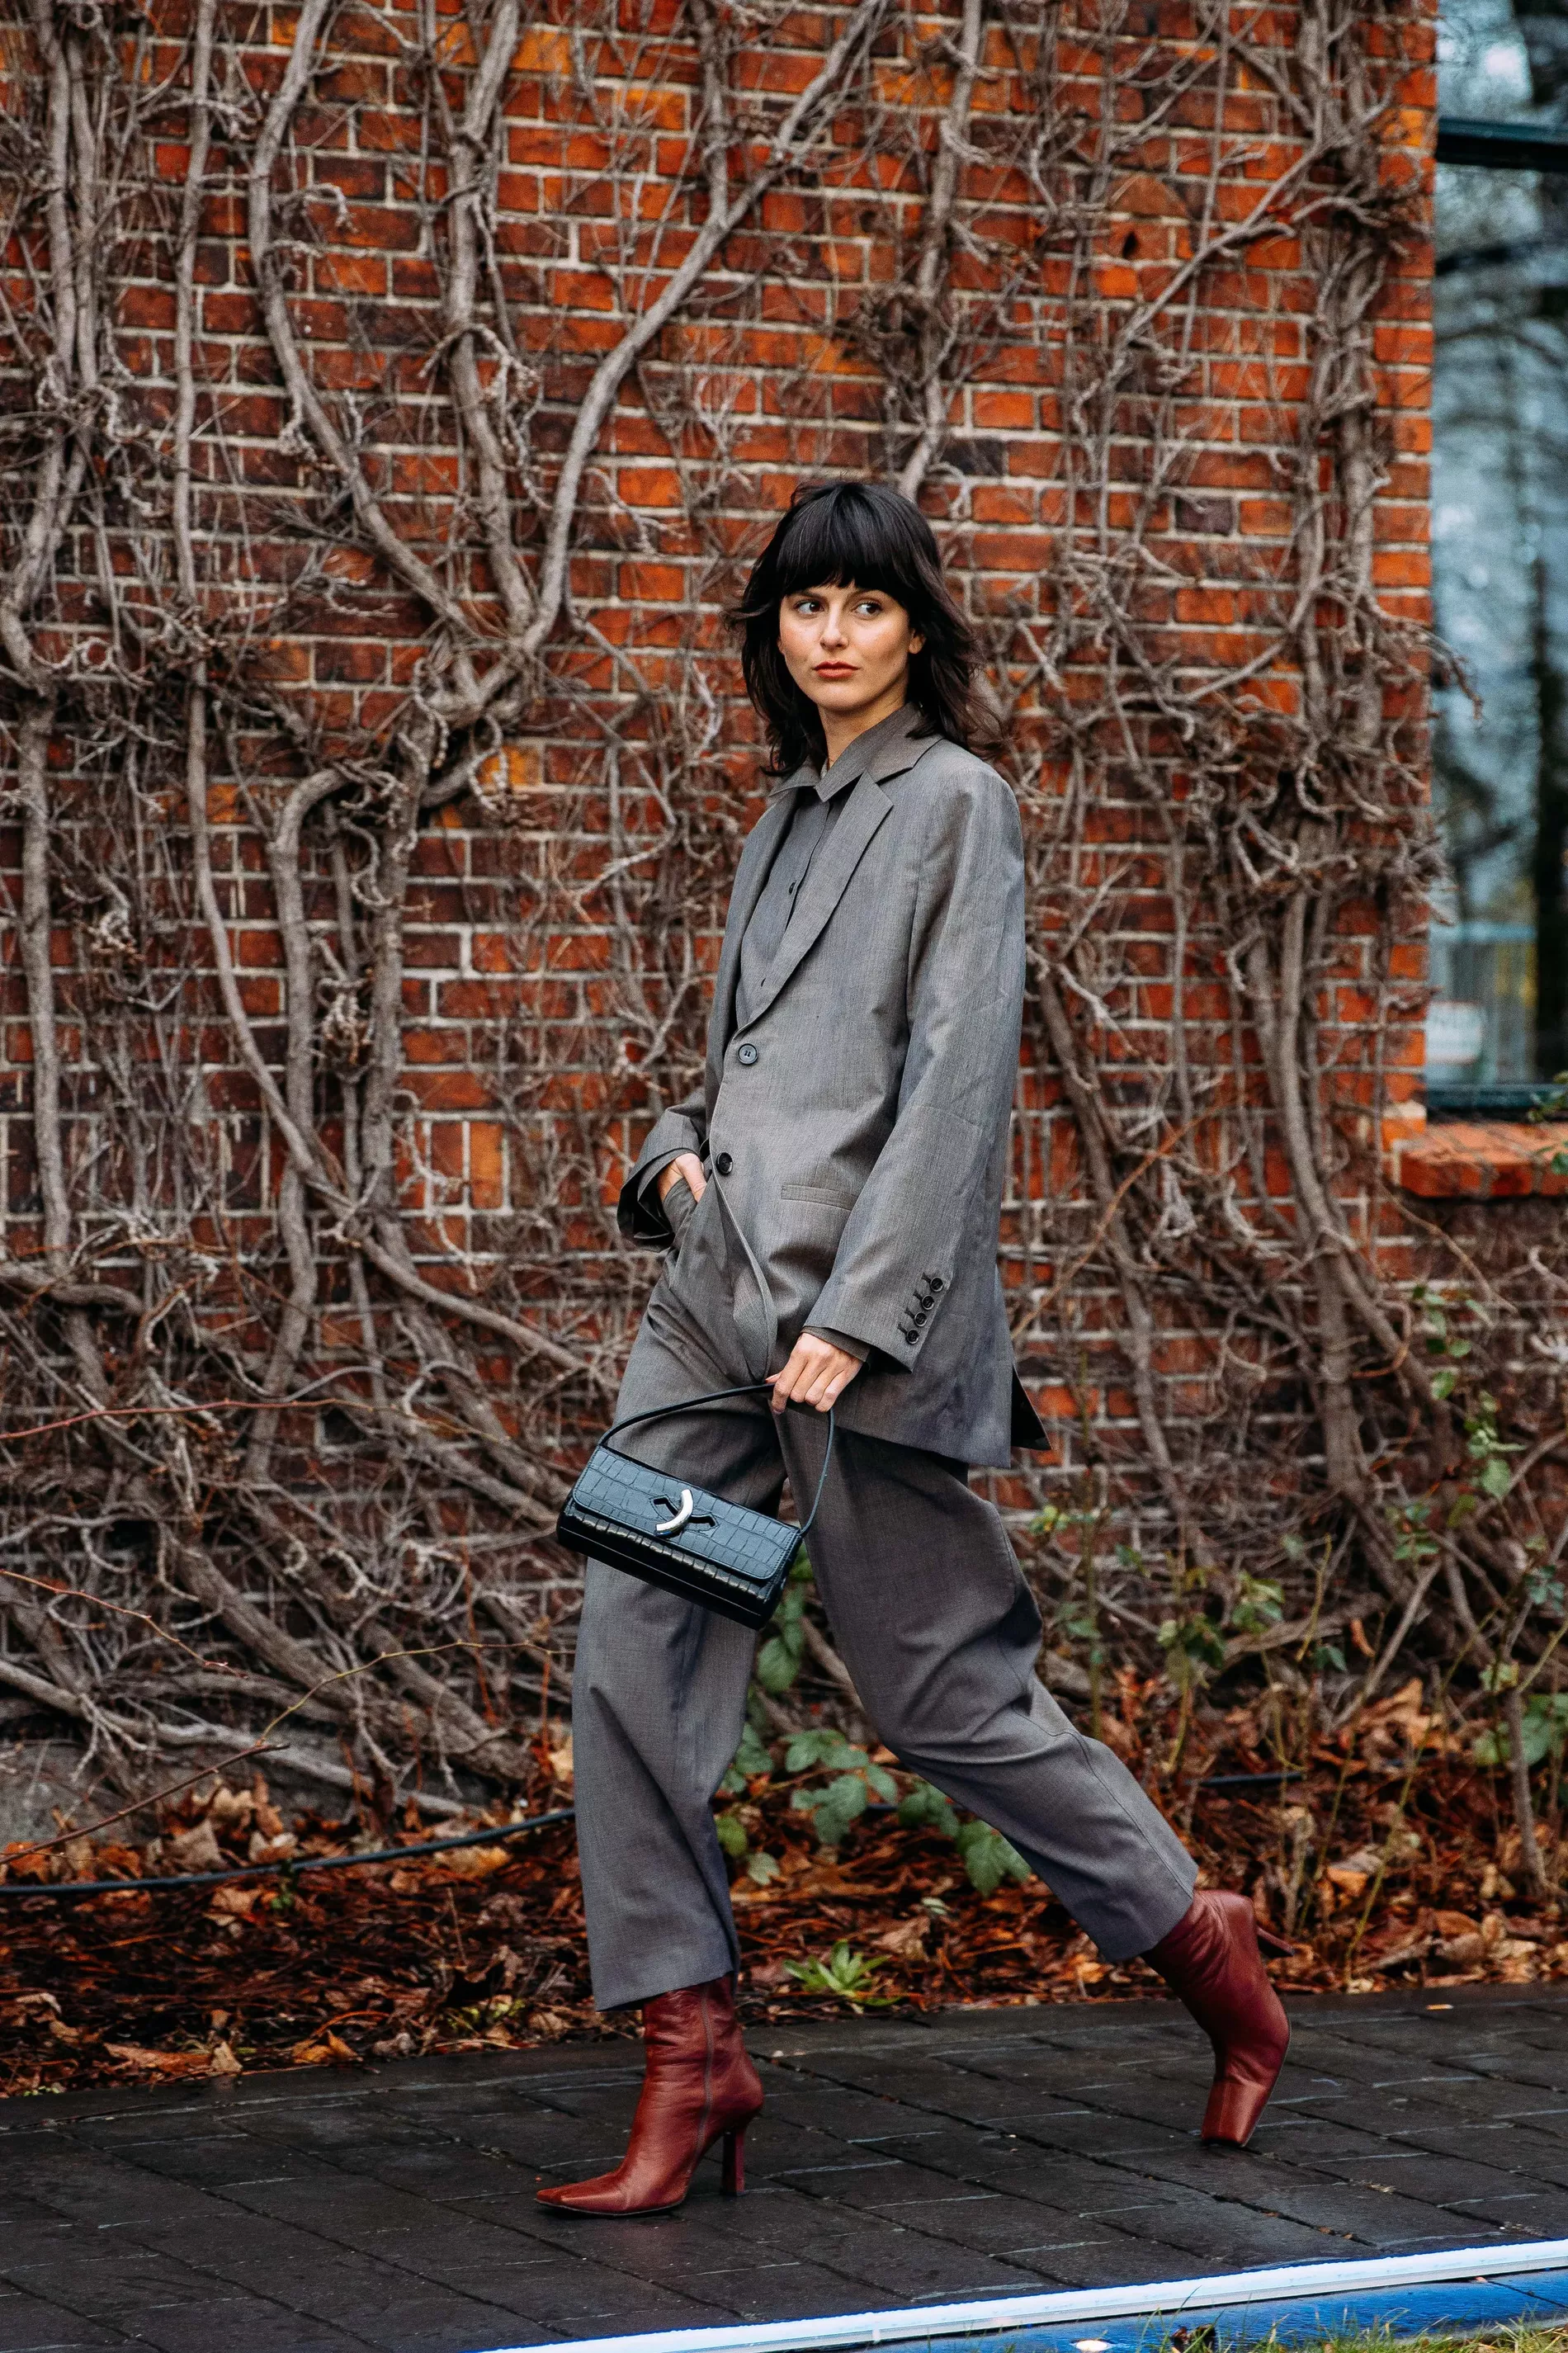 Copenhagen fashion week guest wears grey suit with leather heeled boots 